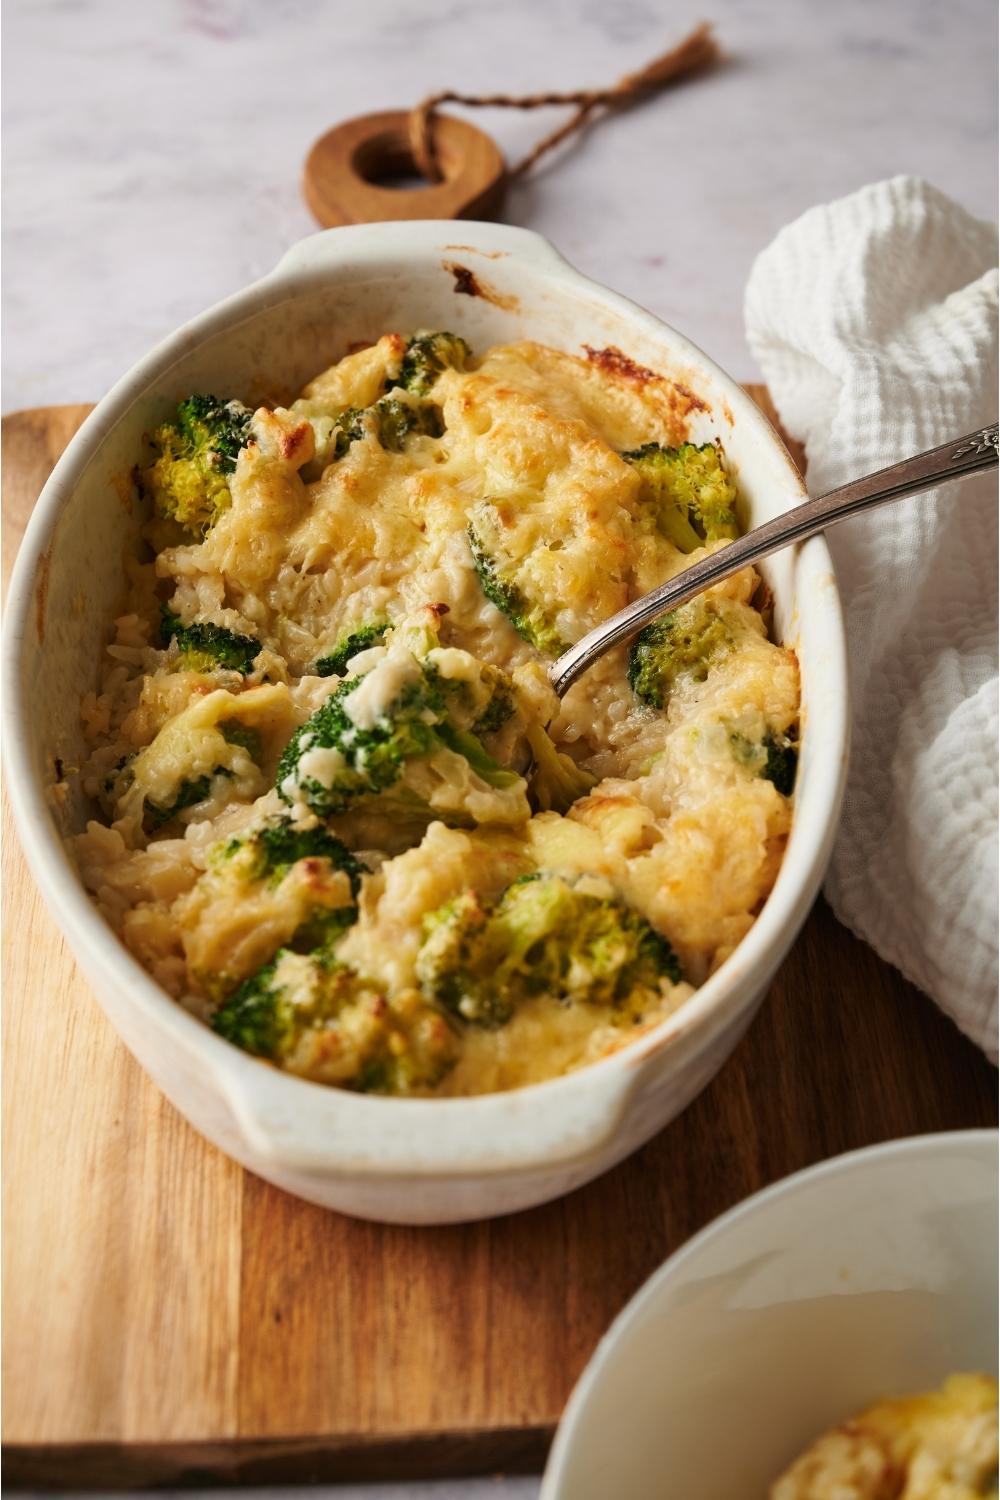 Broccoli rice casserole in a casserole dish on a wood board with a spoon in the dish.